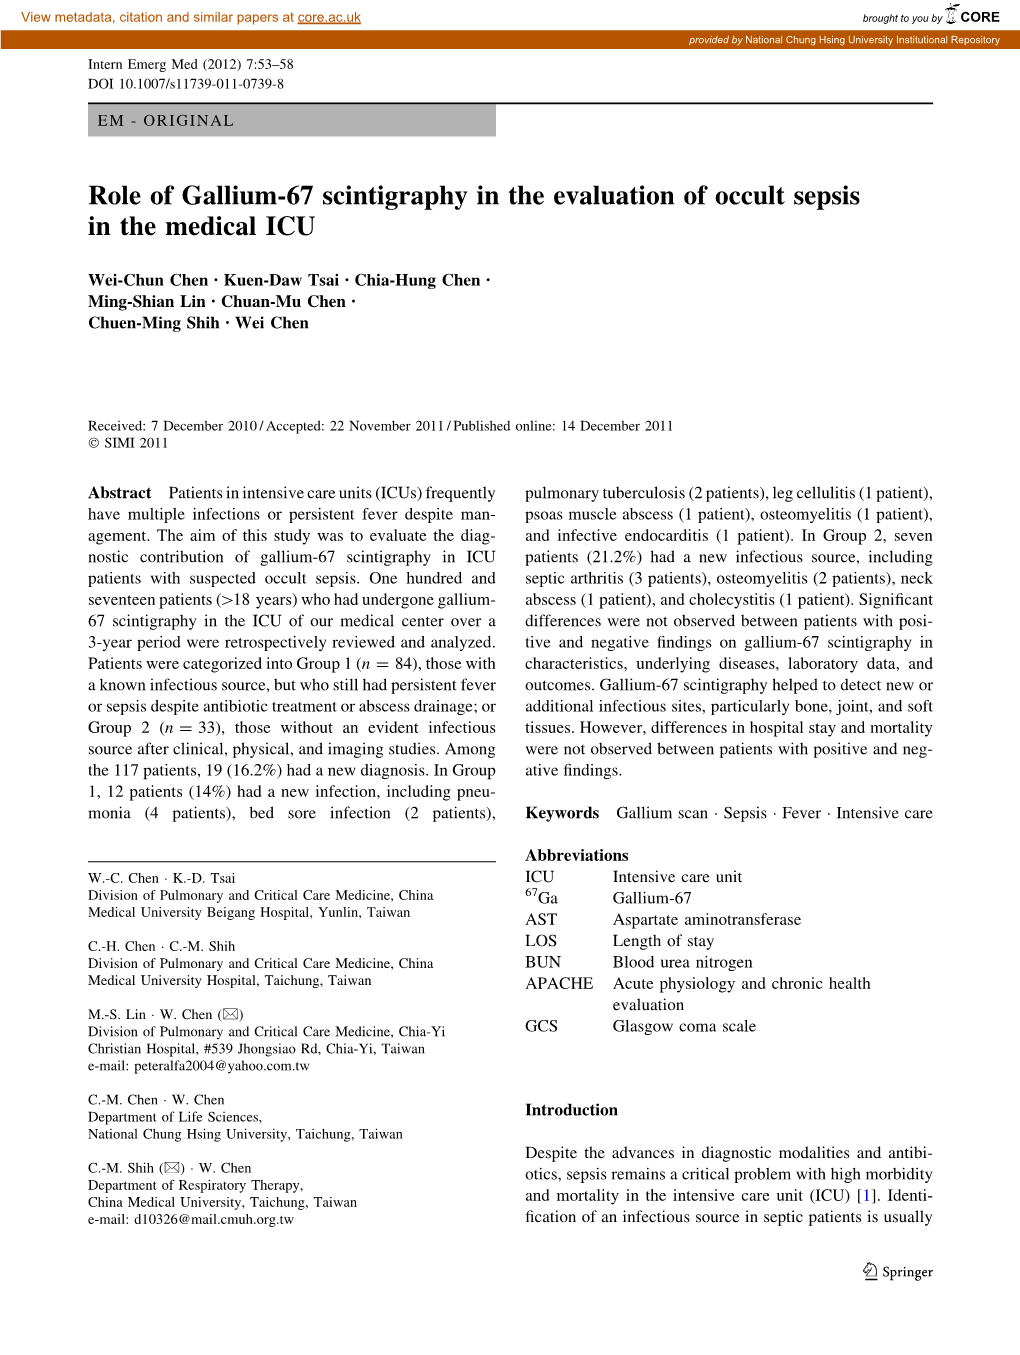 Role of Gallium-67 Scintigraphy in the Evaluation of Occult Sepsis in the Medical ICU